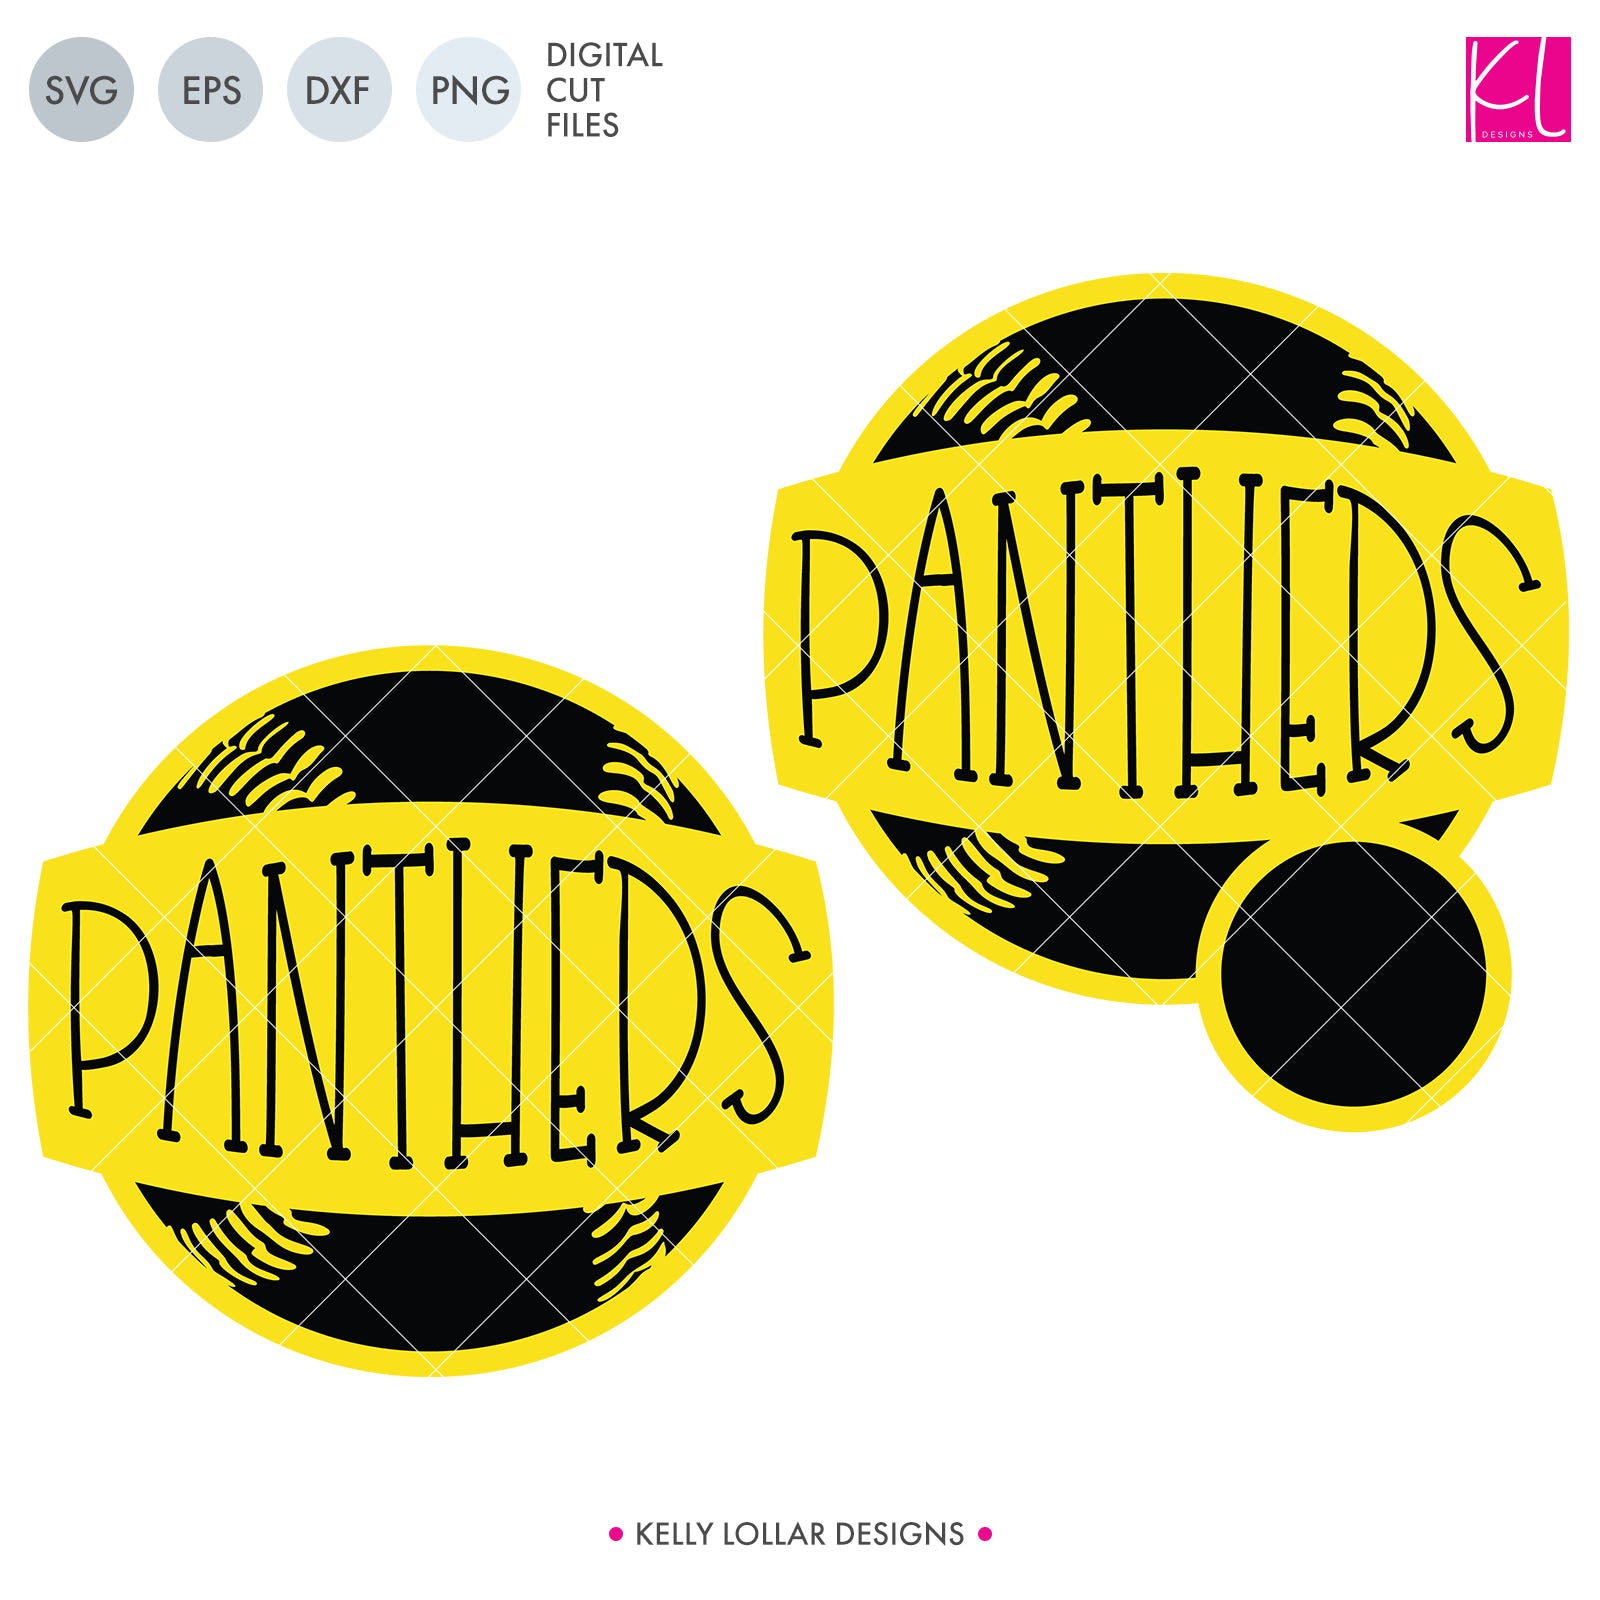 Download Panthers Baseball & Softball Bundle | SVG DXF EPS PNG Cut Files - Kelly Lollar Designs